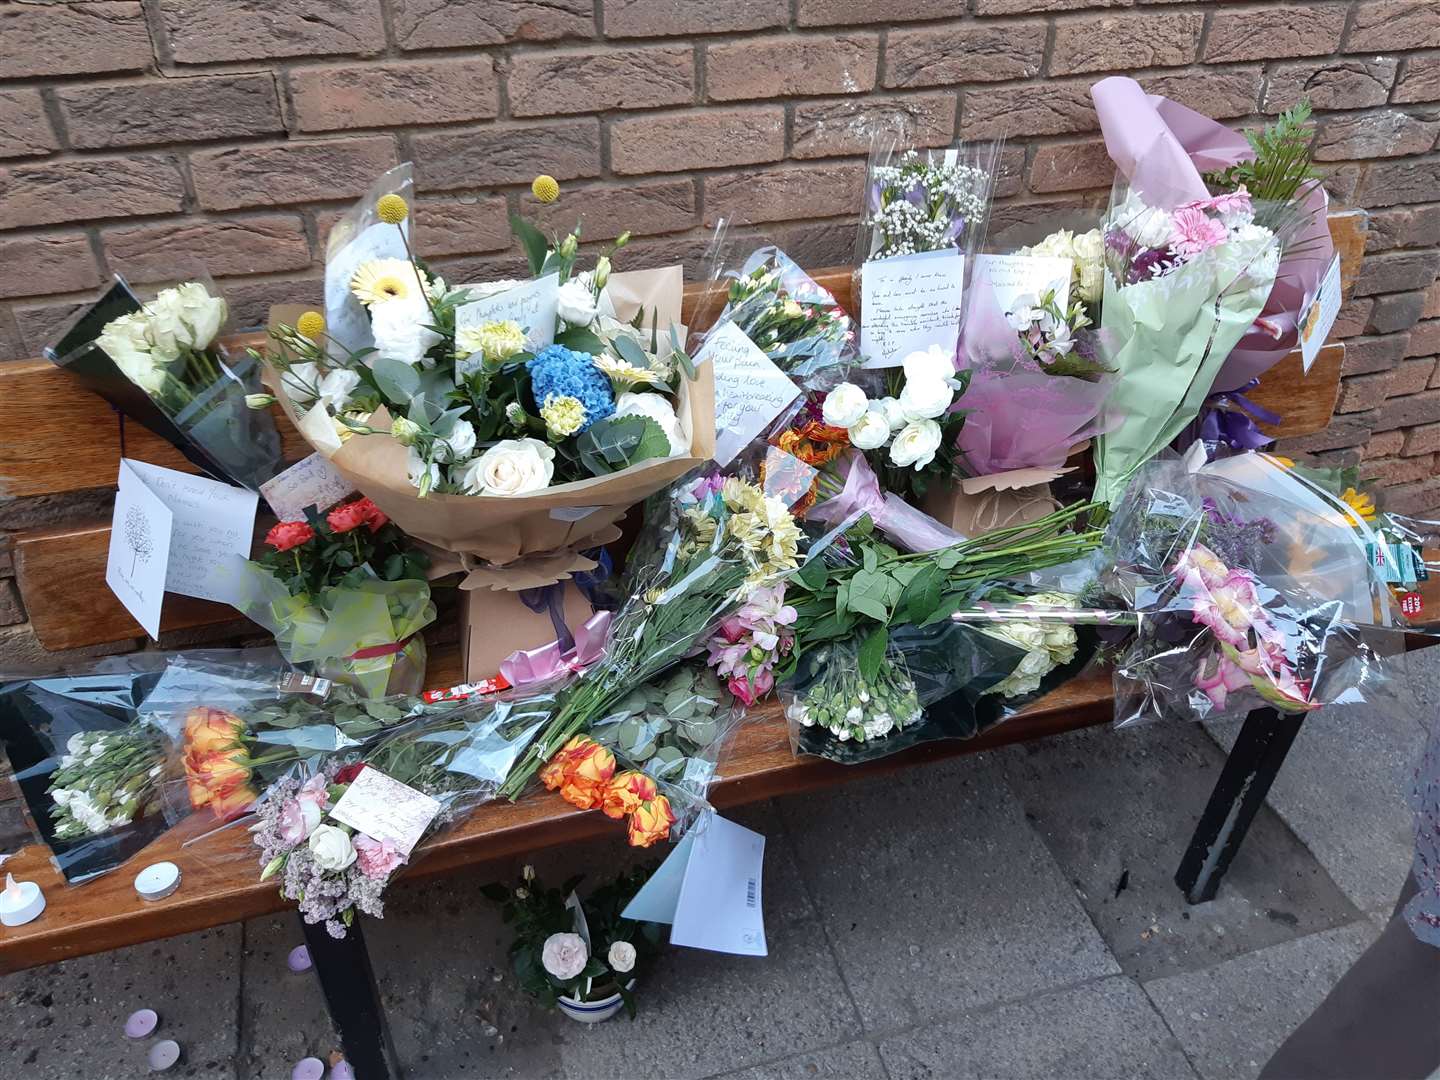 Flowers were left at the scene of the crash